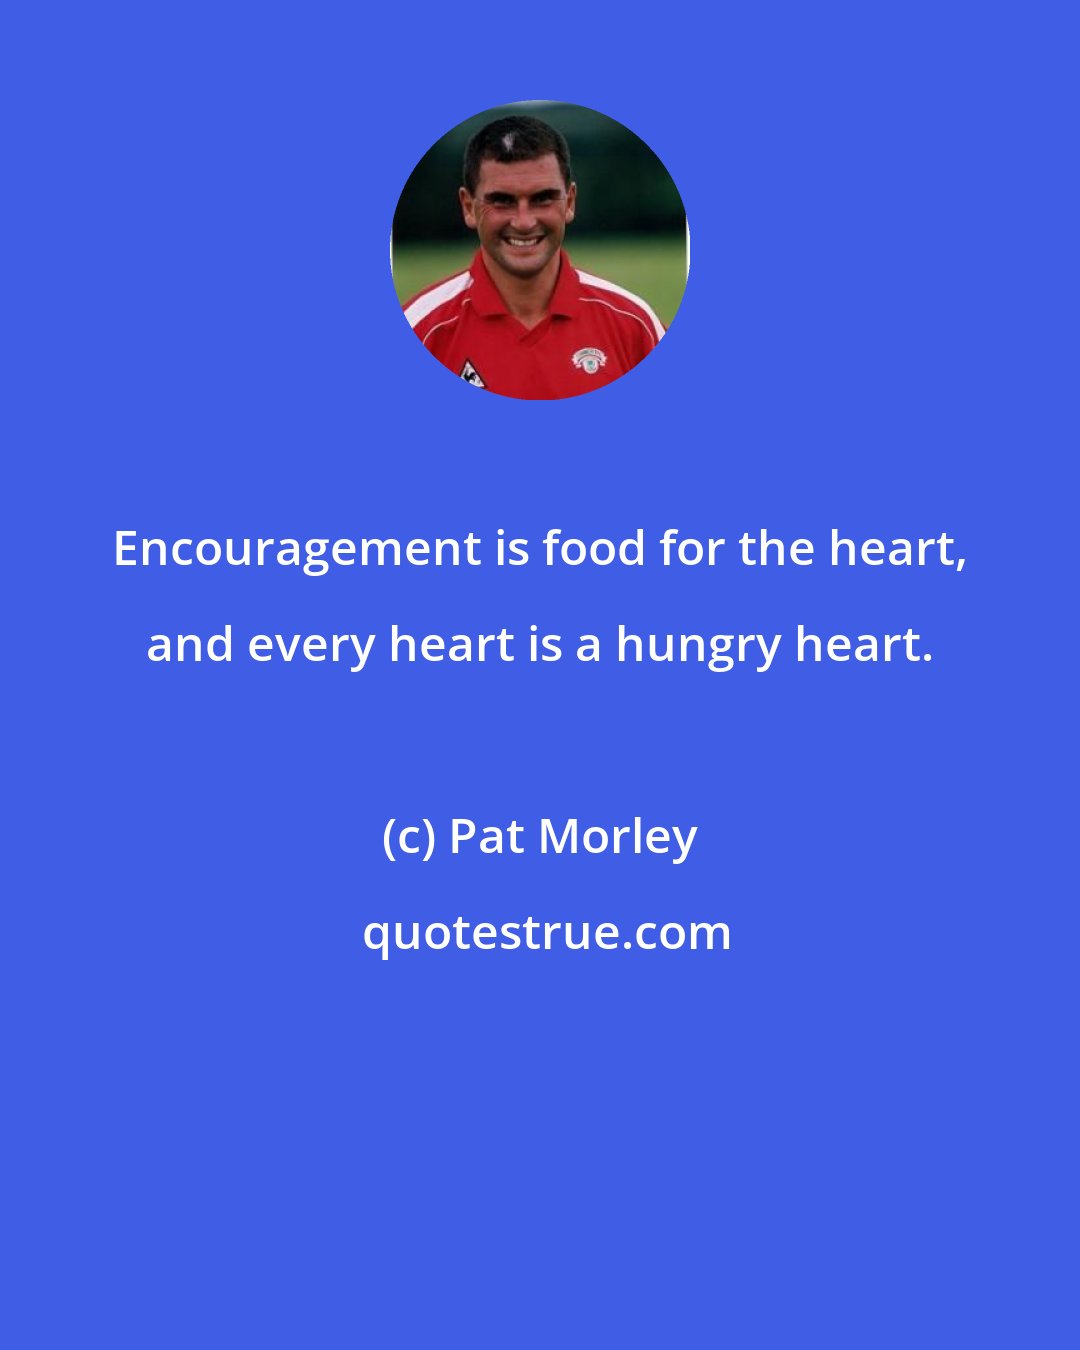 Pat Morley: Encouragement is food for the heart, and every heart is a hungry heart.